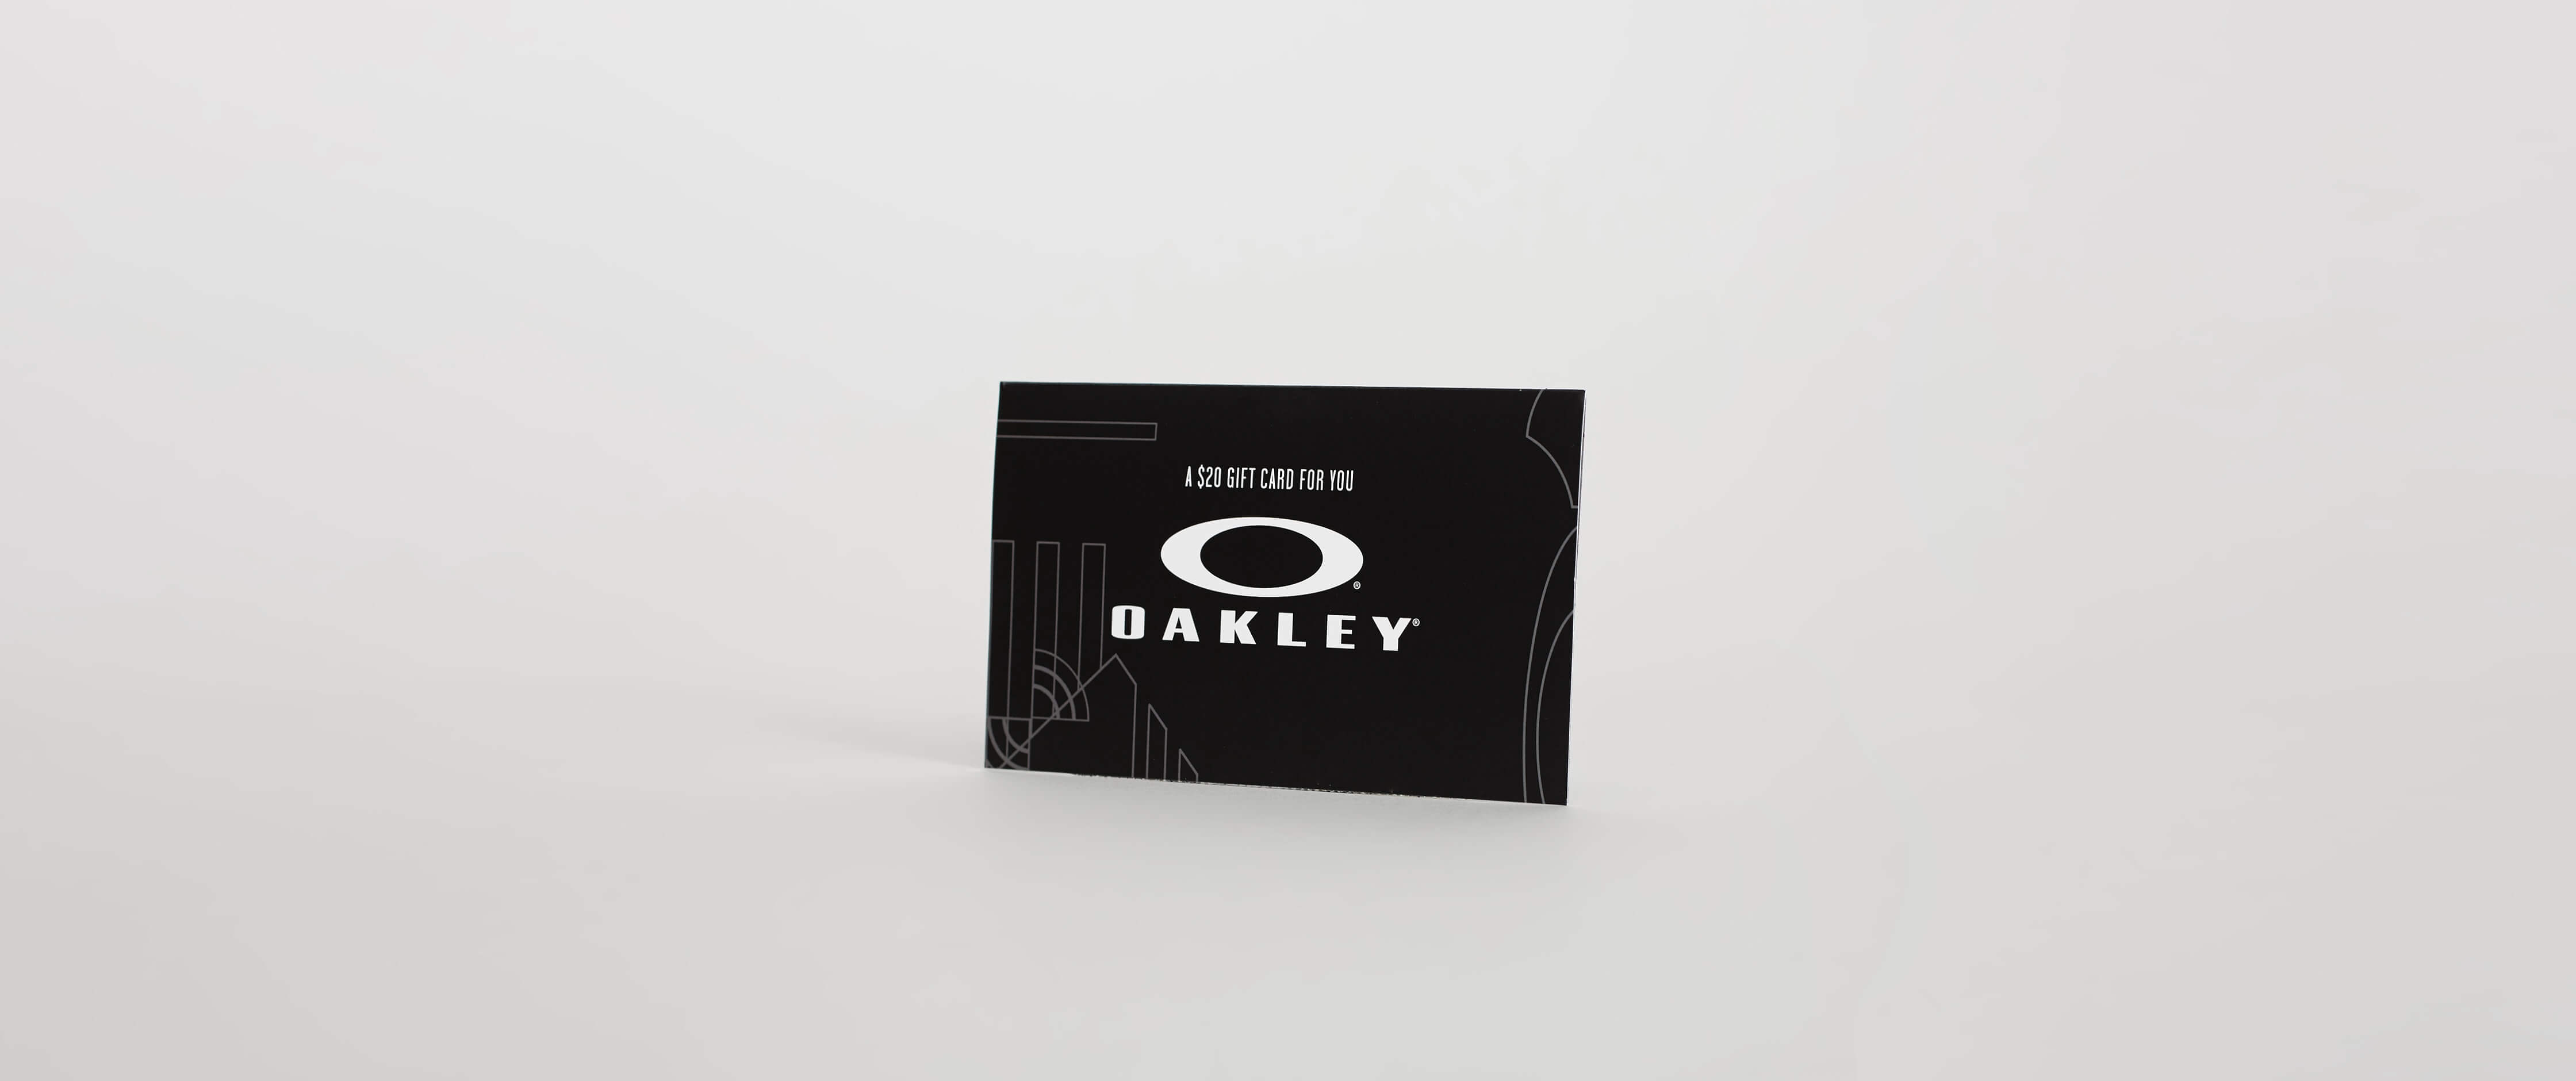 Oakley Buckle Gift Card - Clothing in 